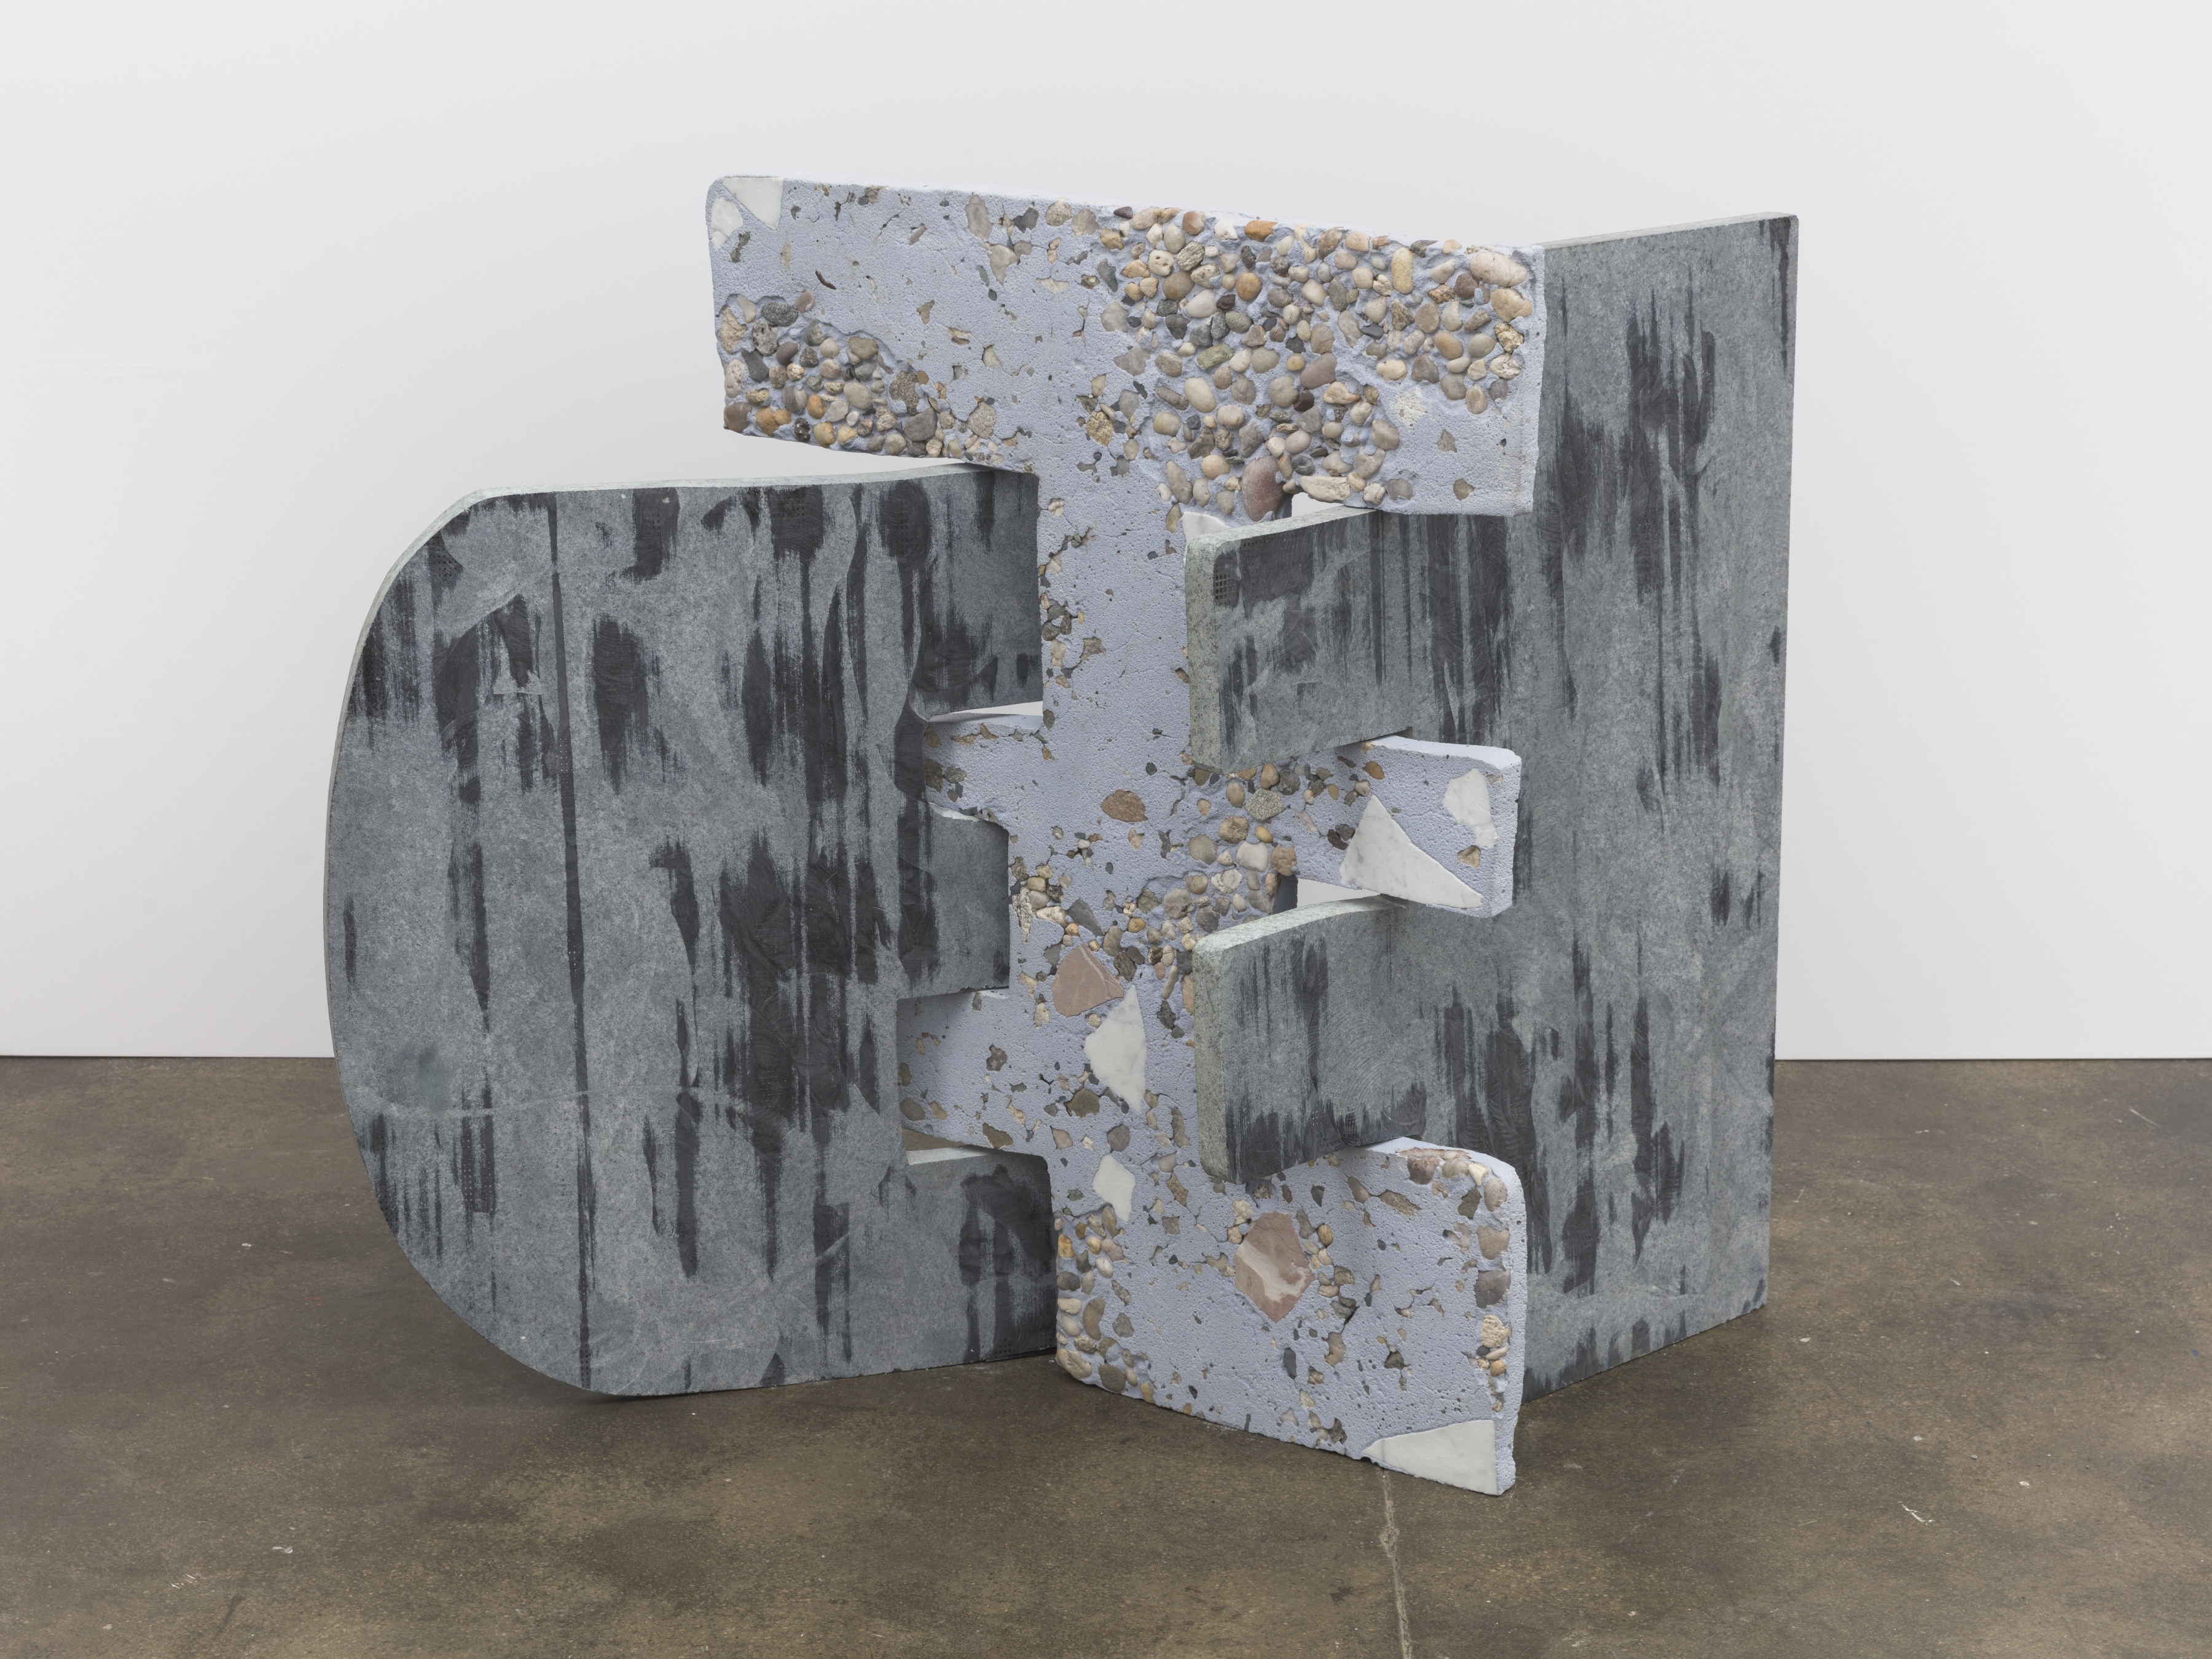 Dependents 4, 2021
soapstone and blue pigmented concrete with beach stone aggregate
38 3/4 x 48 7/16 x 18 1/2 inches (98.5 x 123 x 47 cm) SM-S.21.1438
&nbsp;